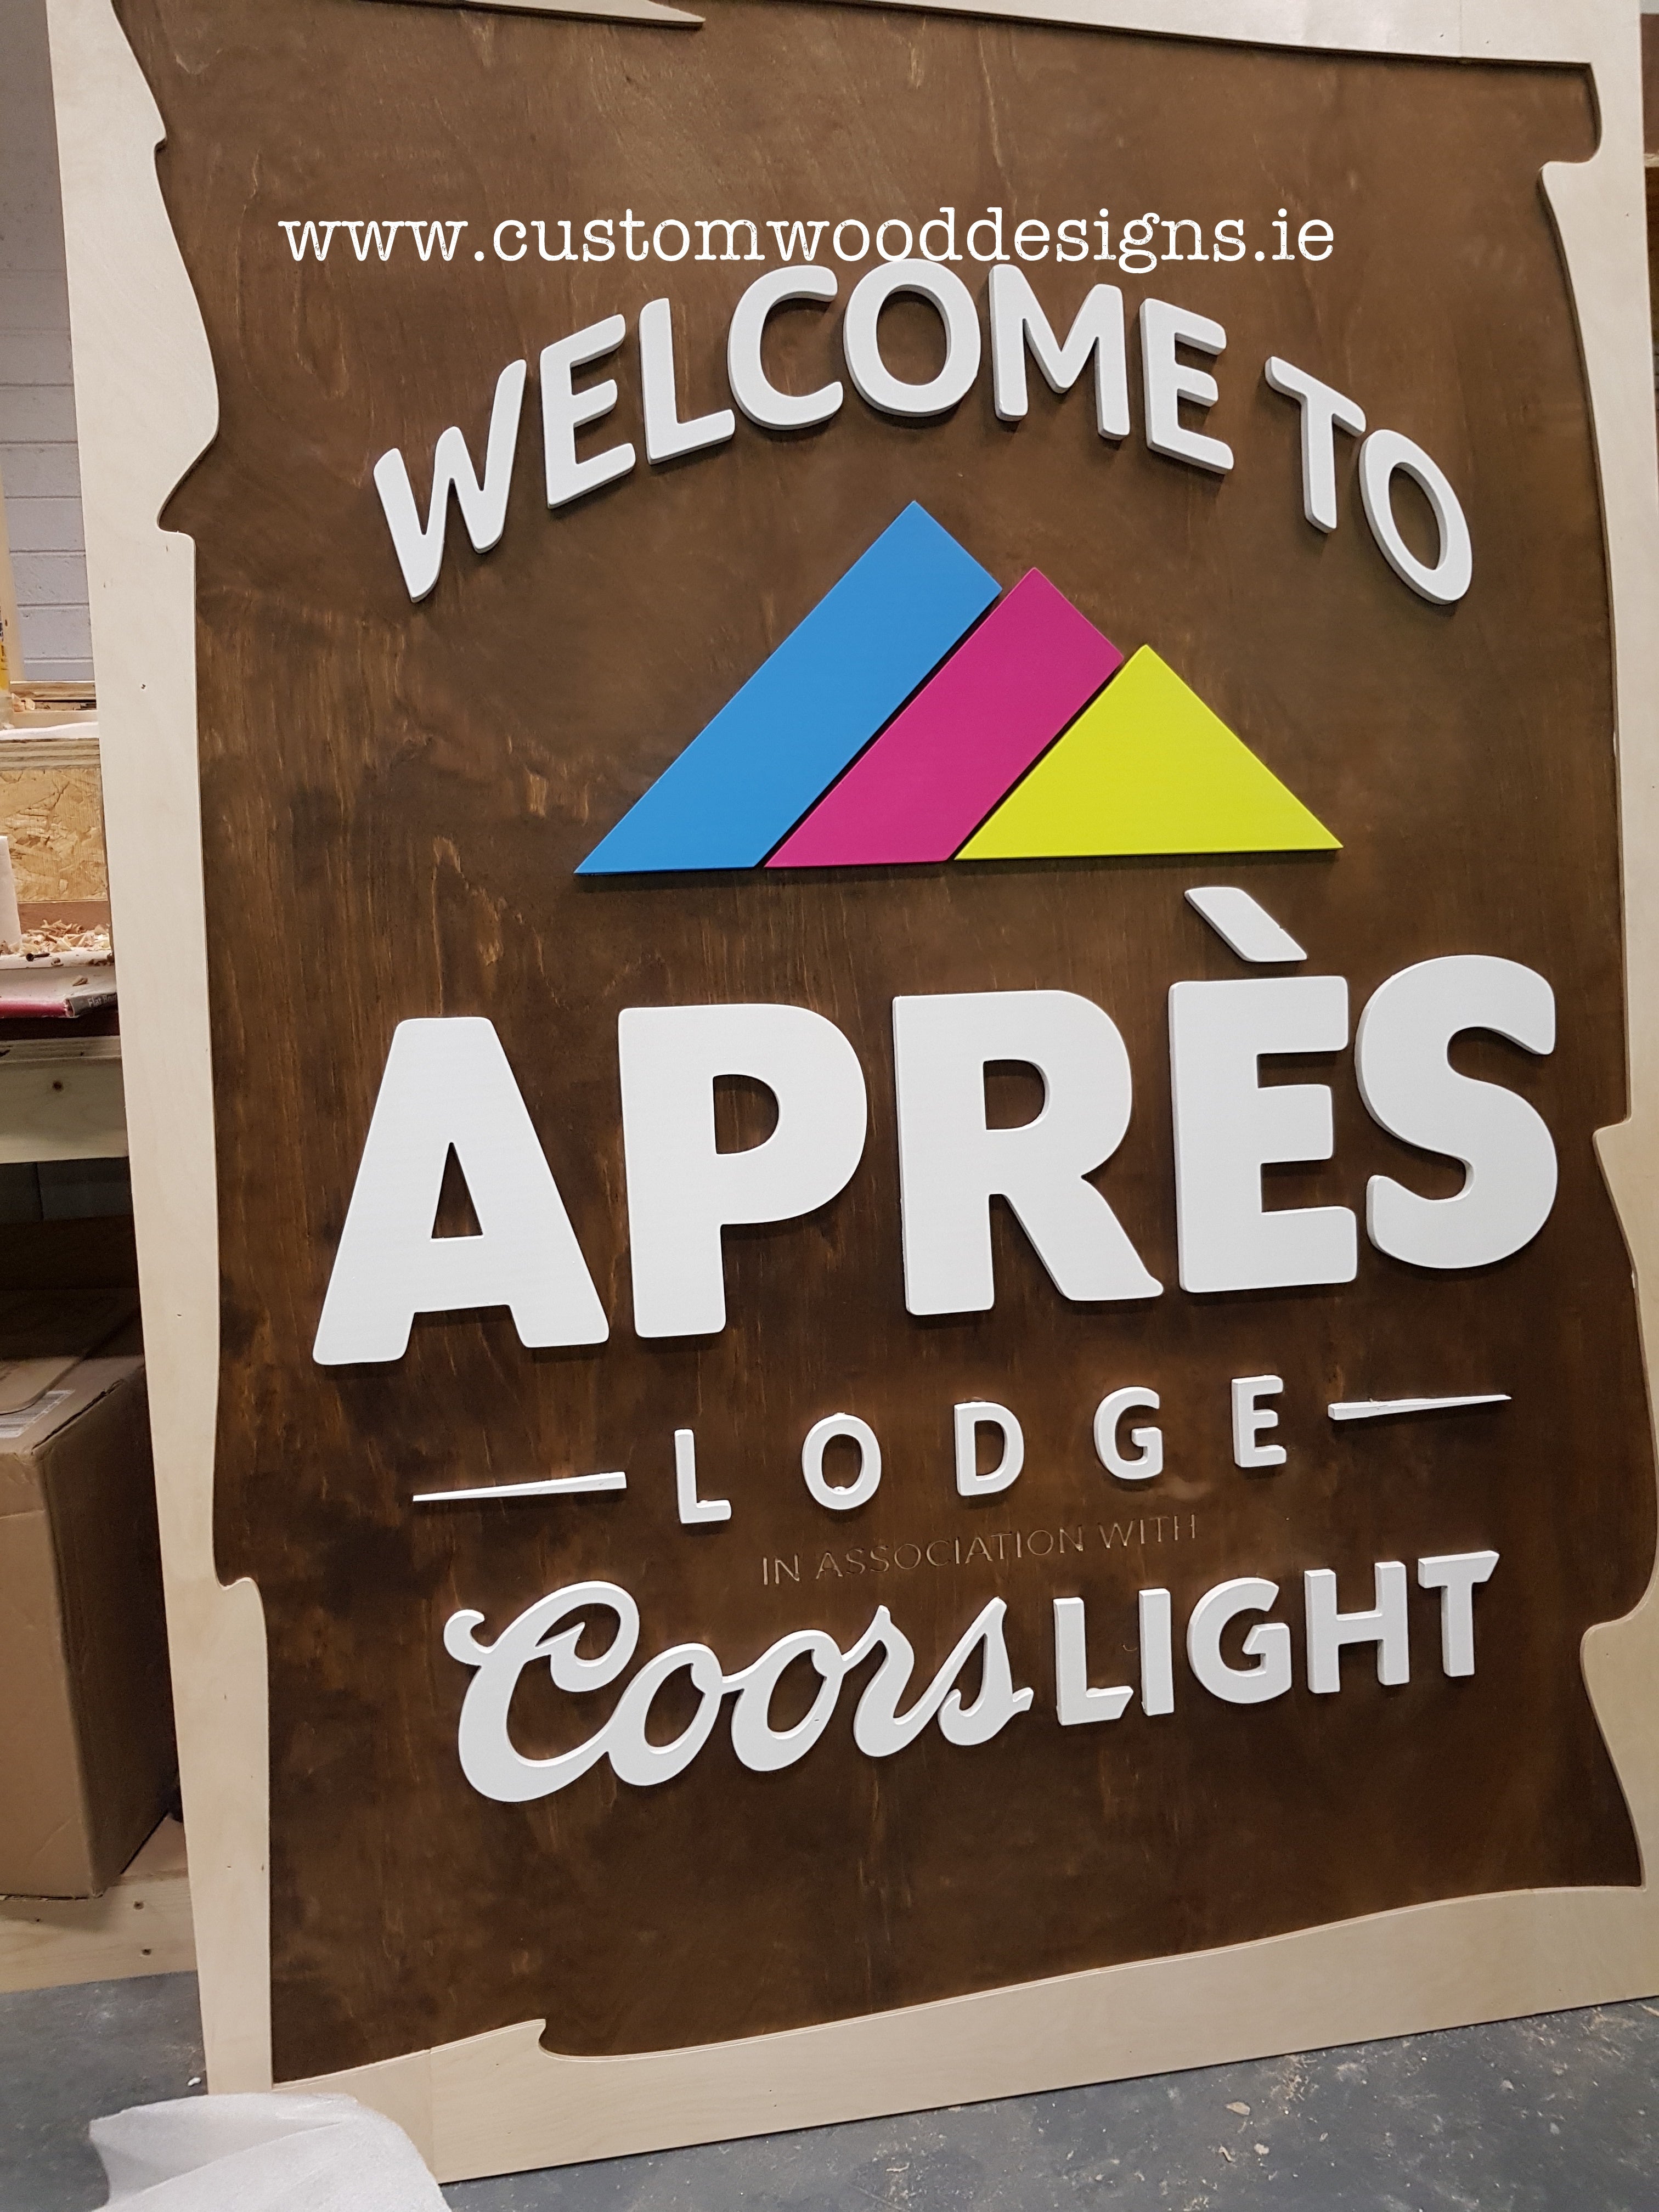 Apres Logo Cuistom Wood Designs branding company wood branding dublin ireland engraveing cnc specialists online Apres event signs timber signs wood signs ireland (1)